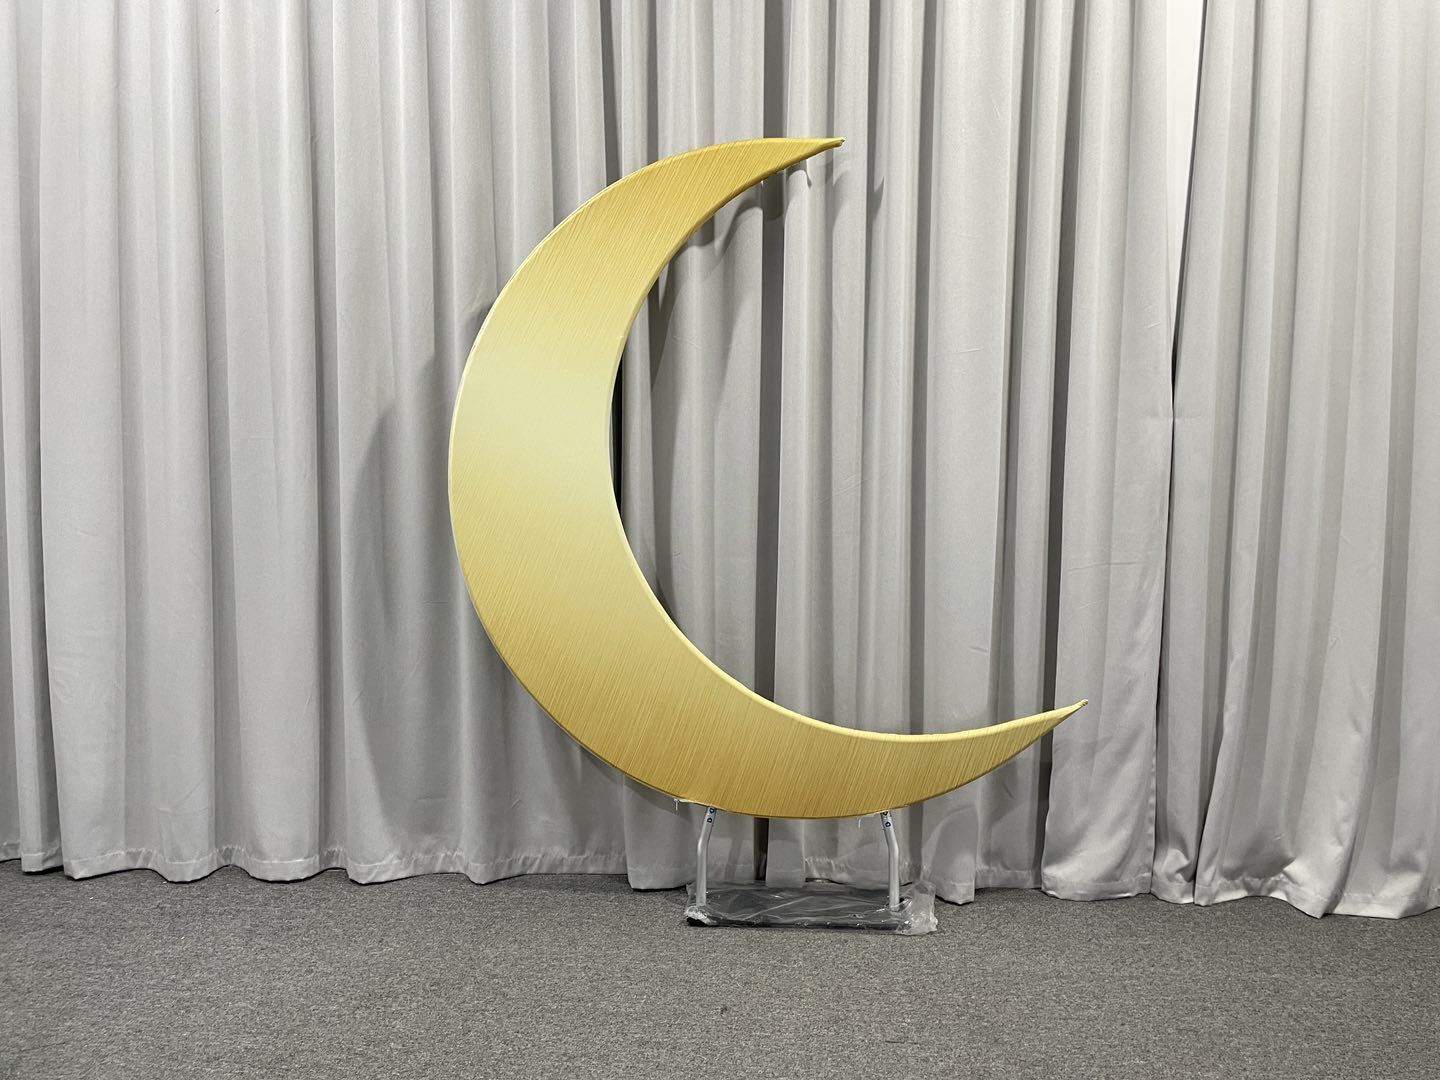 Flash Sale Mocsicka Half Crescent aluminum alloy Stand and Double-printed Cover Backdrop for Party Decoration